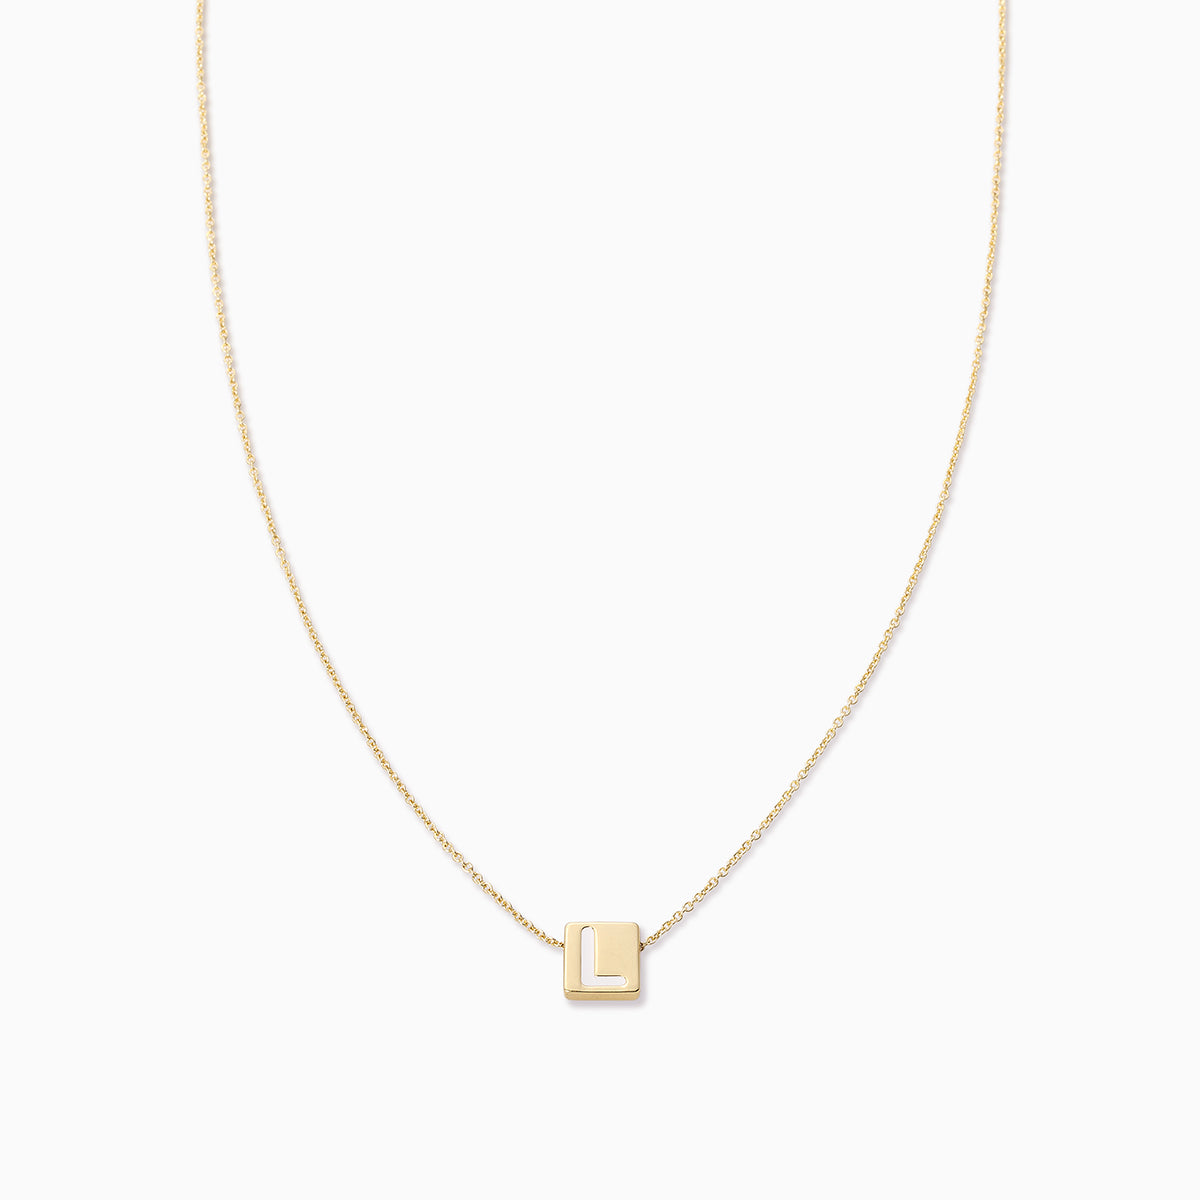 Bold Letter Necklace | Gold L | Product Image | Uncommon James